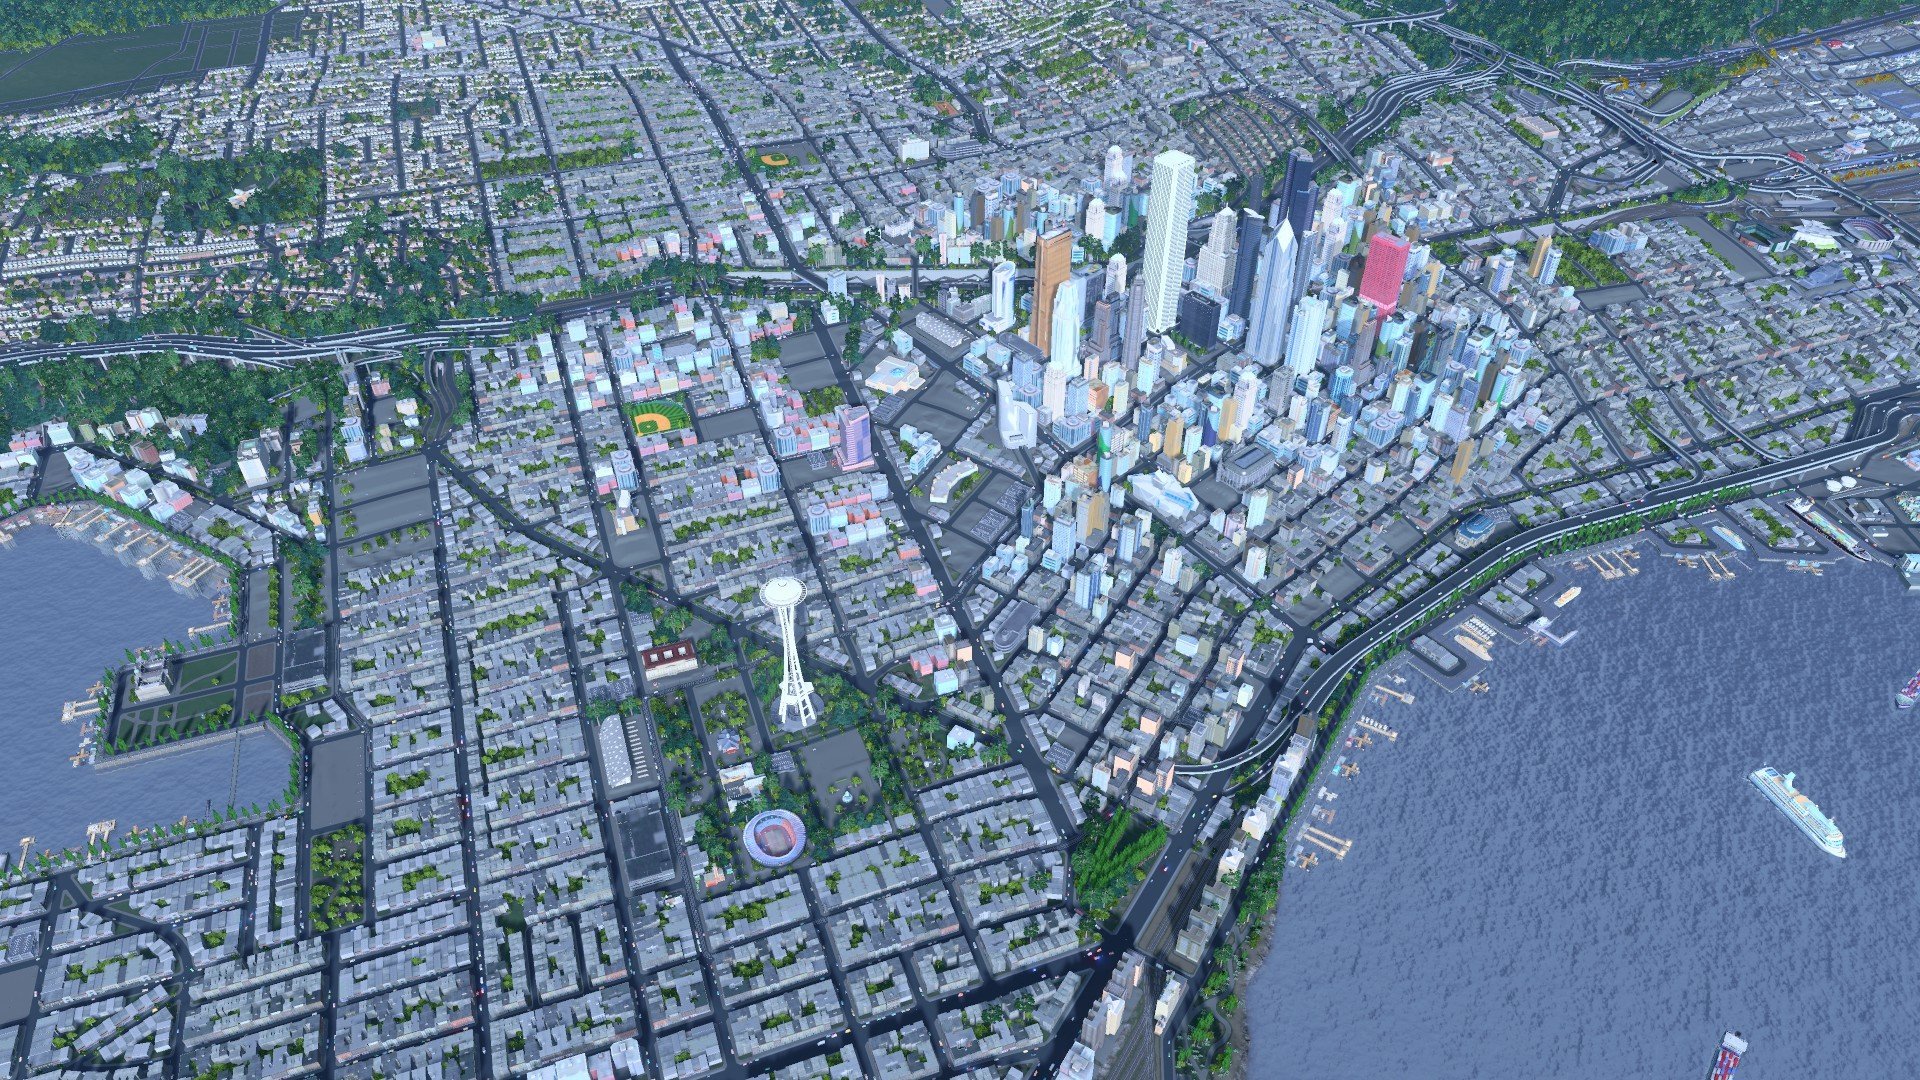 Cities Skylines 2 Gameplay Improvements: What Should the Devs Do?